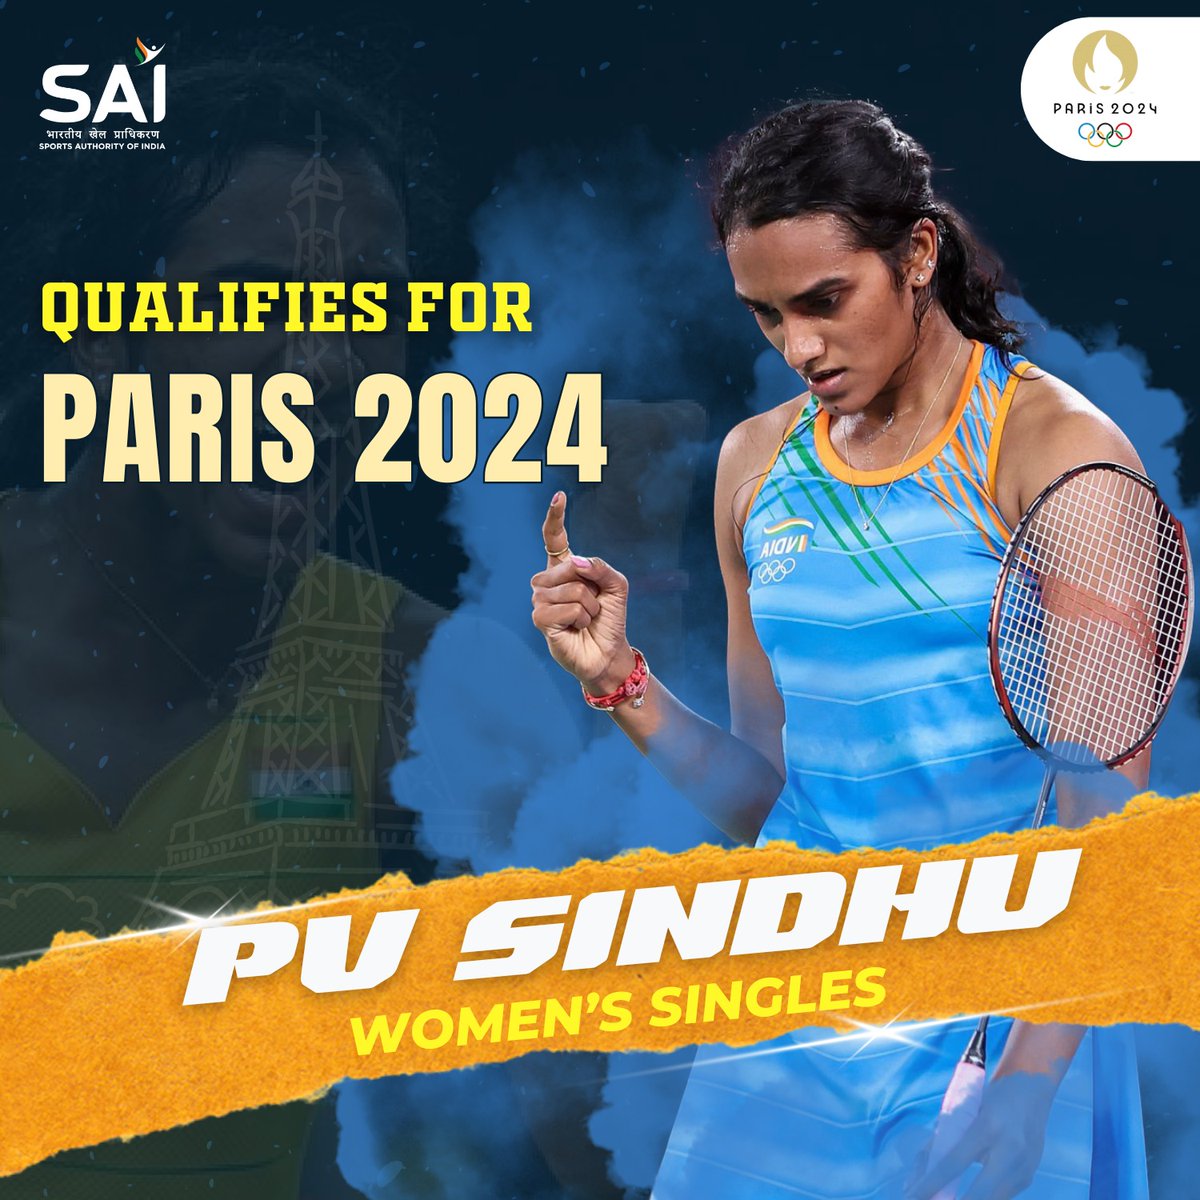 Seven shuttlers to represent India across four categories in #2024ParisOlympics. 

Two-time Olympic medalist #PV Sindhu will again lead India's challenge in the women's category where she is the only Indian entrant. 

Star pairing of Satwiksairaj Rankireddy & Chirag Shetty have